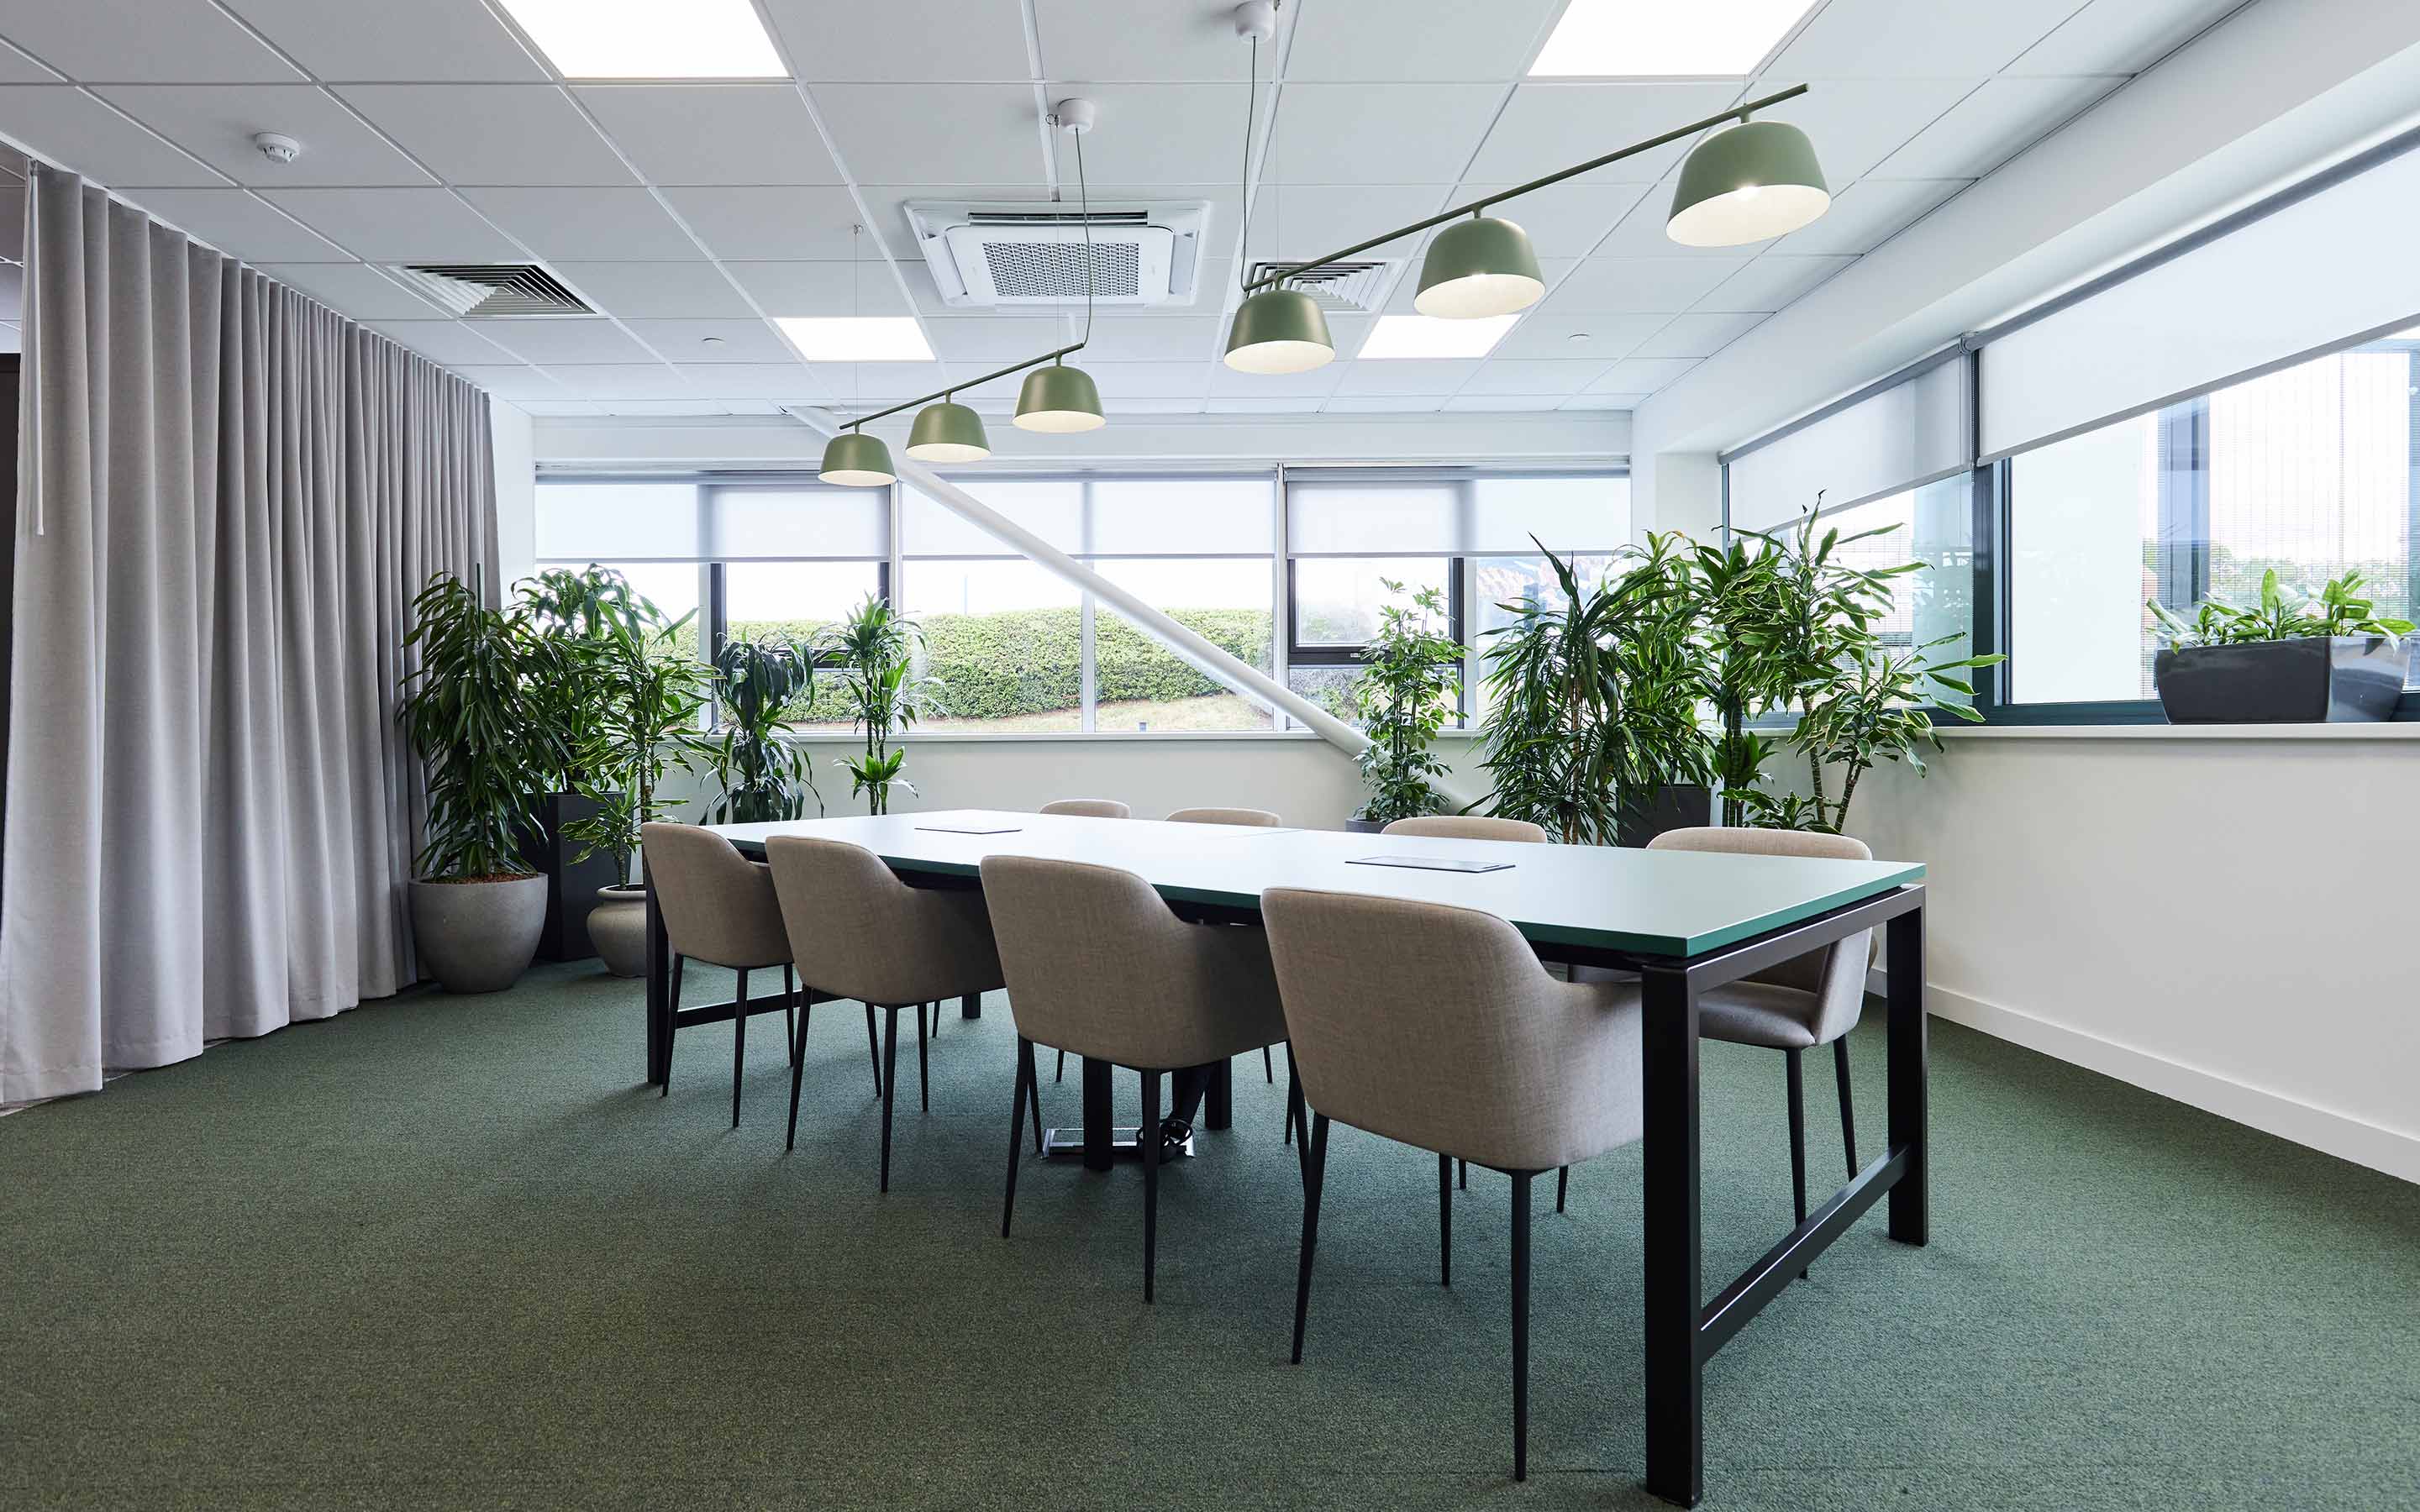 An office desking area features pendant lighting, soft grey office chairs, and indoor planting